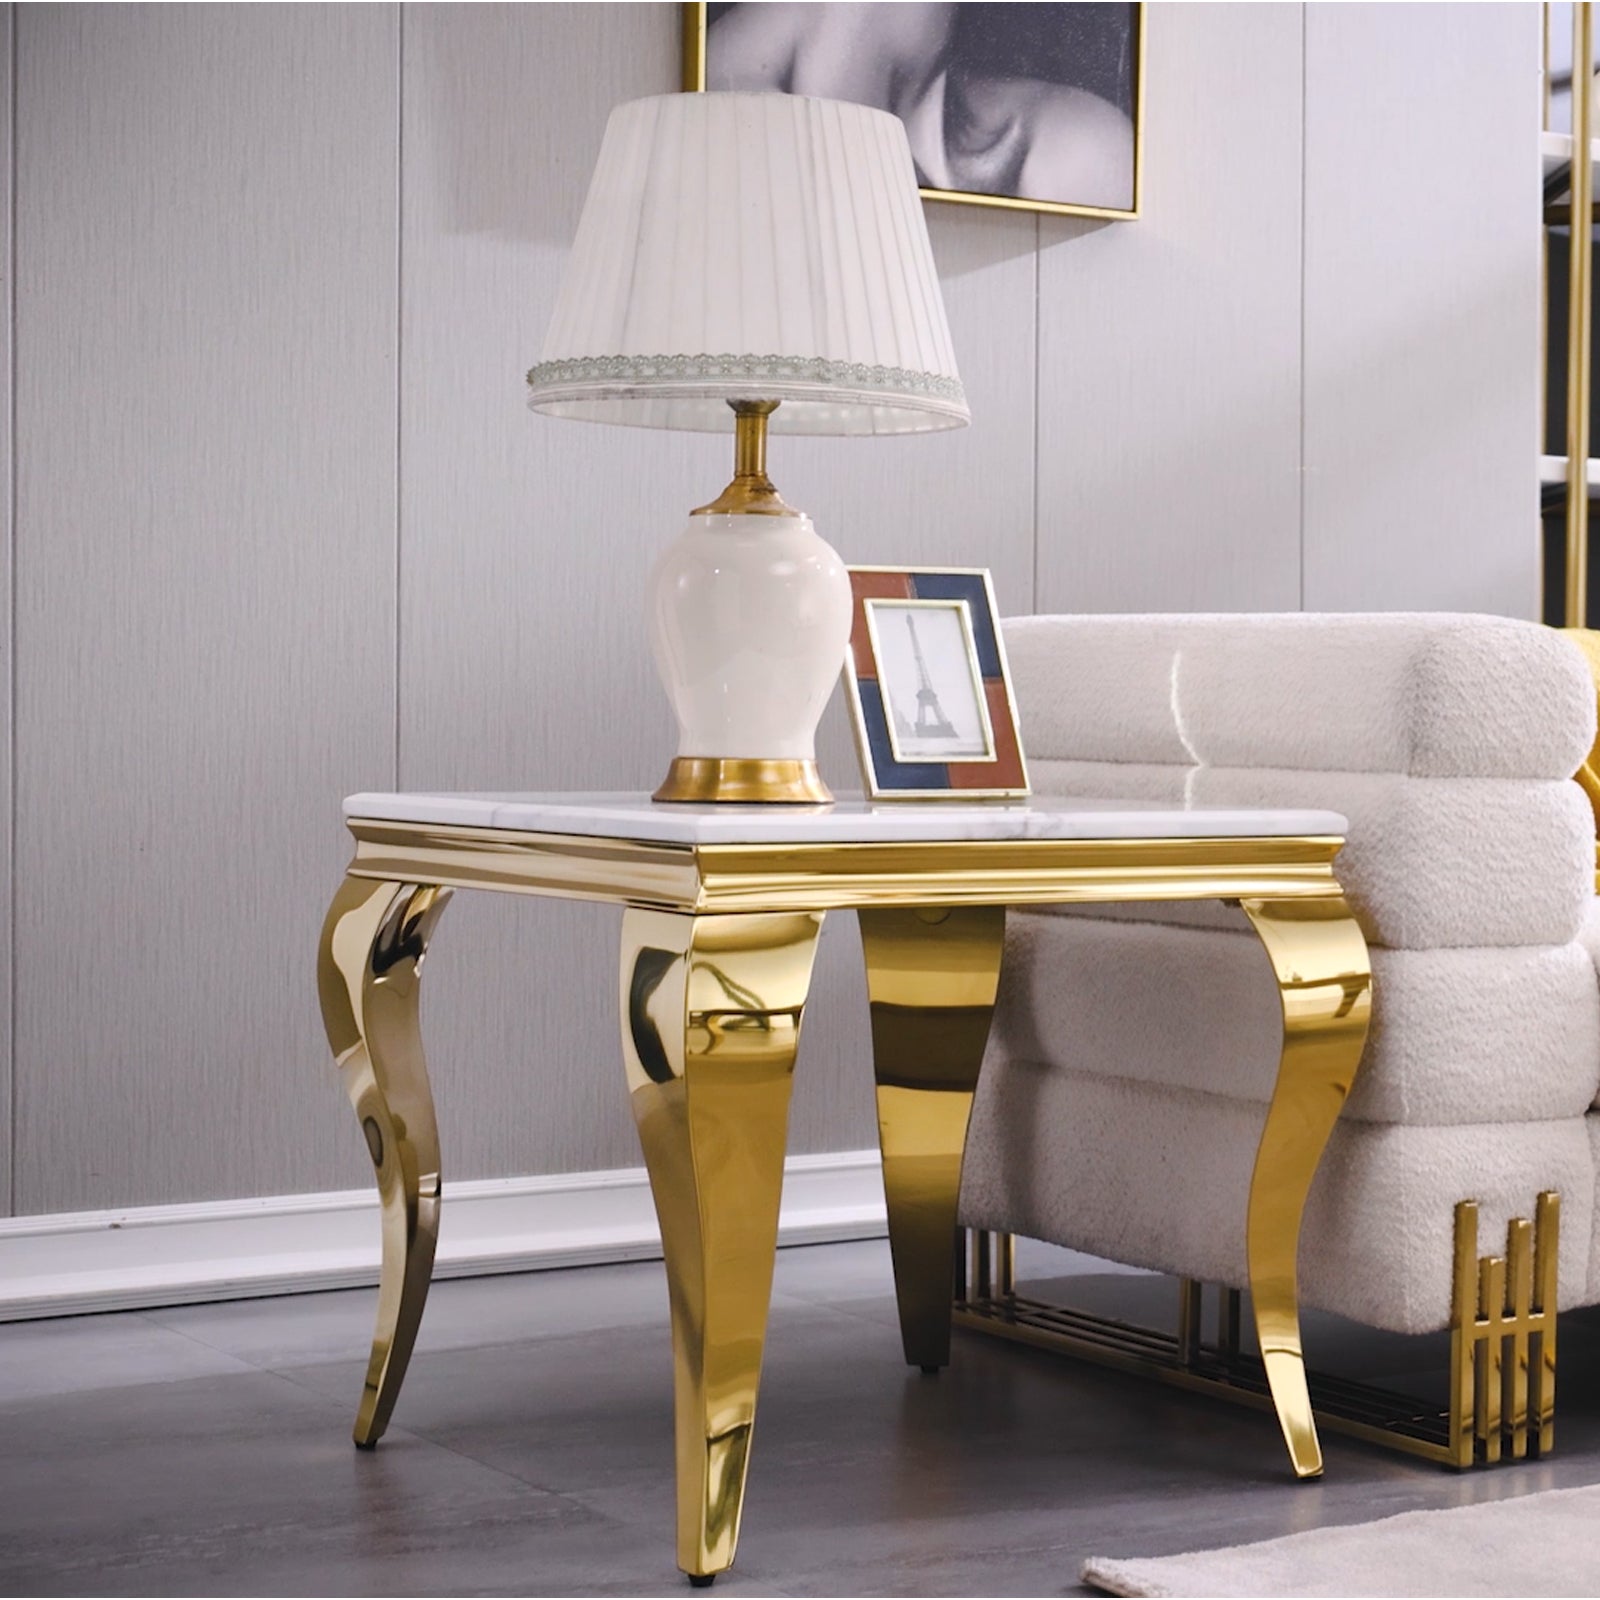 White Gold End Table with Stainless Steel Legs | E411